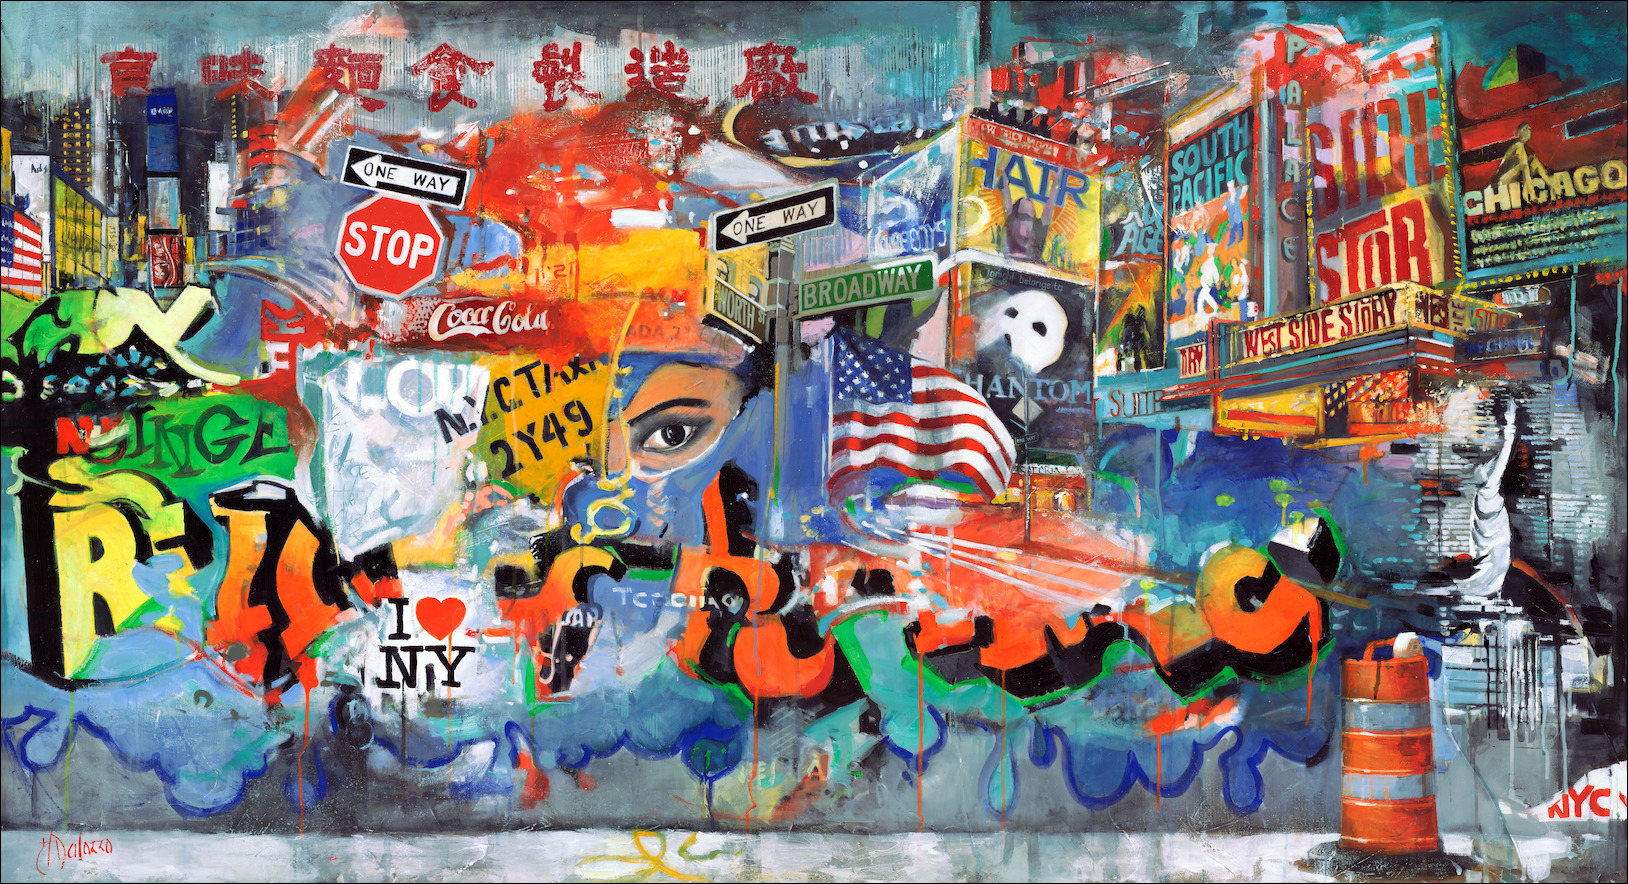 New York Cityscape Canvas Print "West Side Story" by Judith Dalozzo